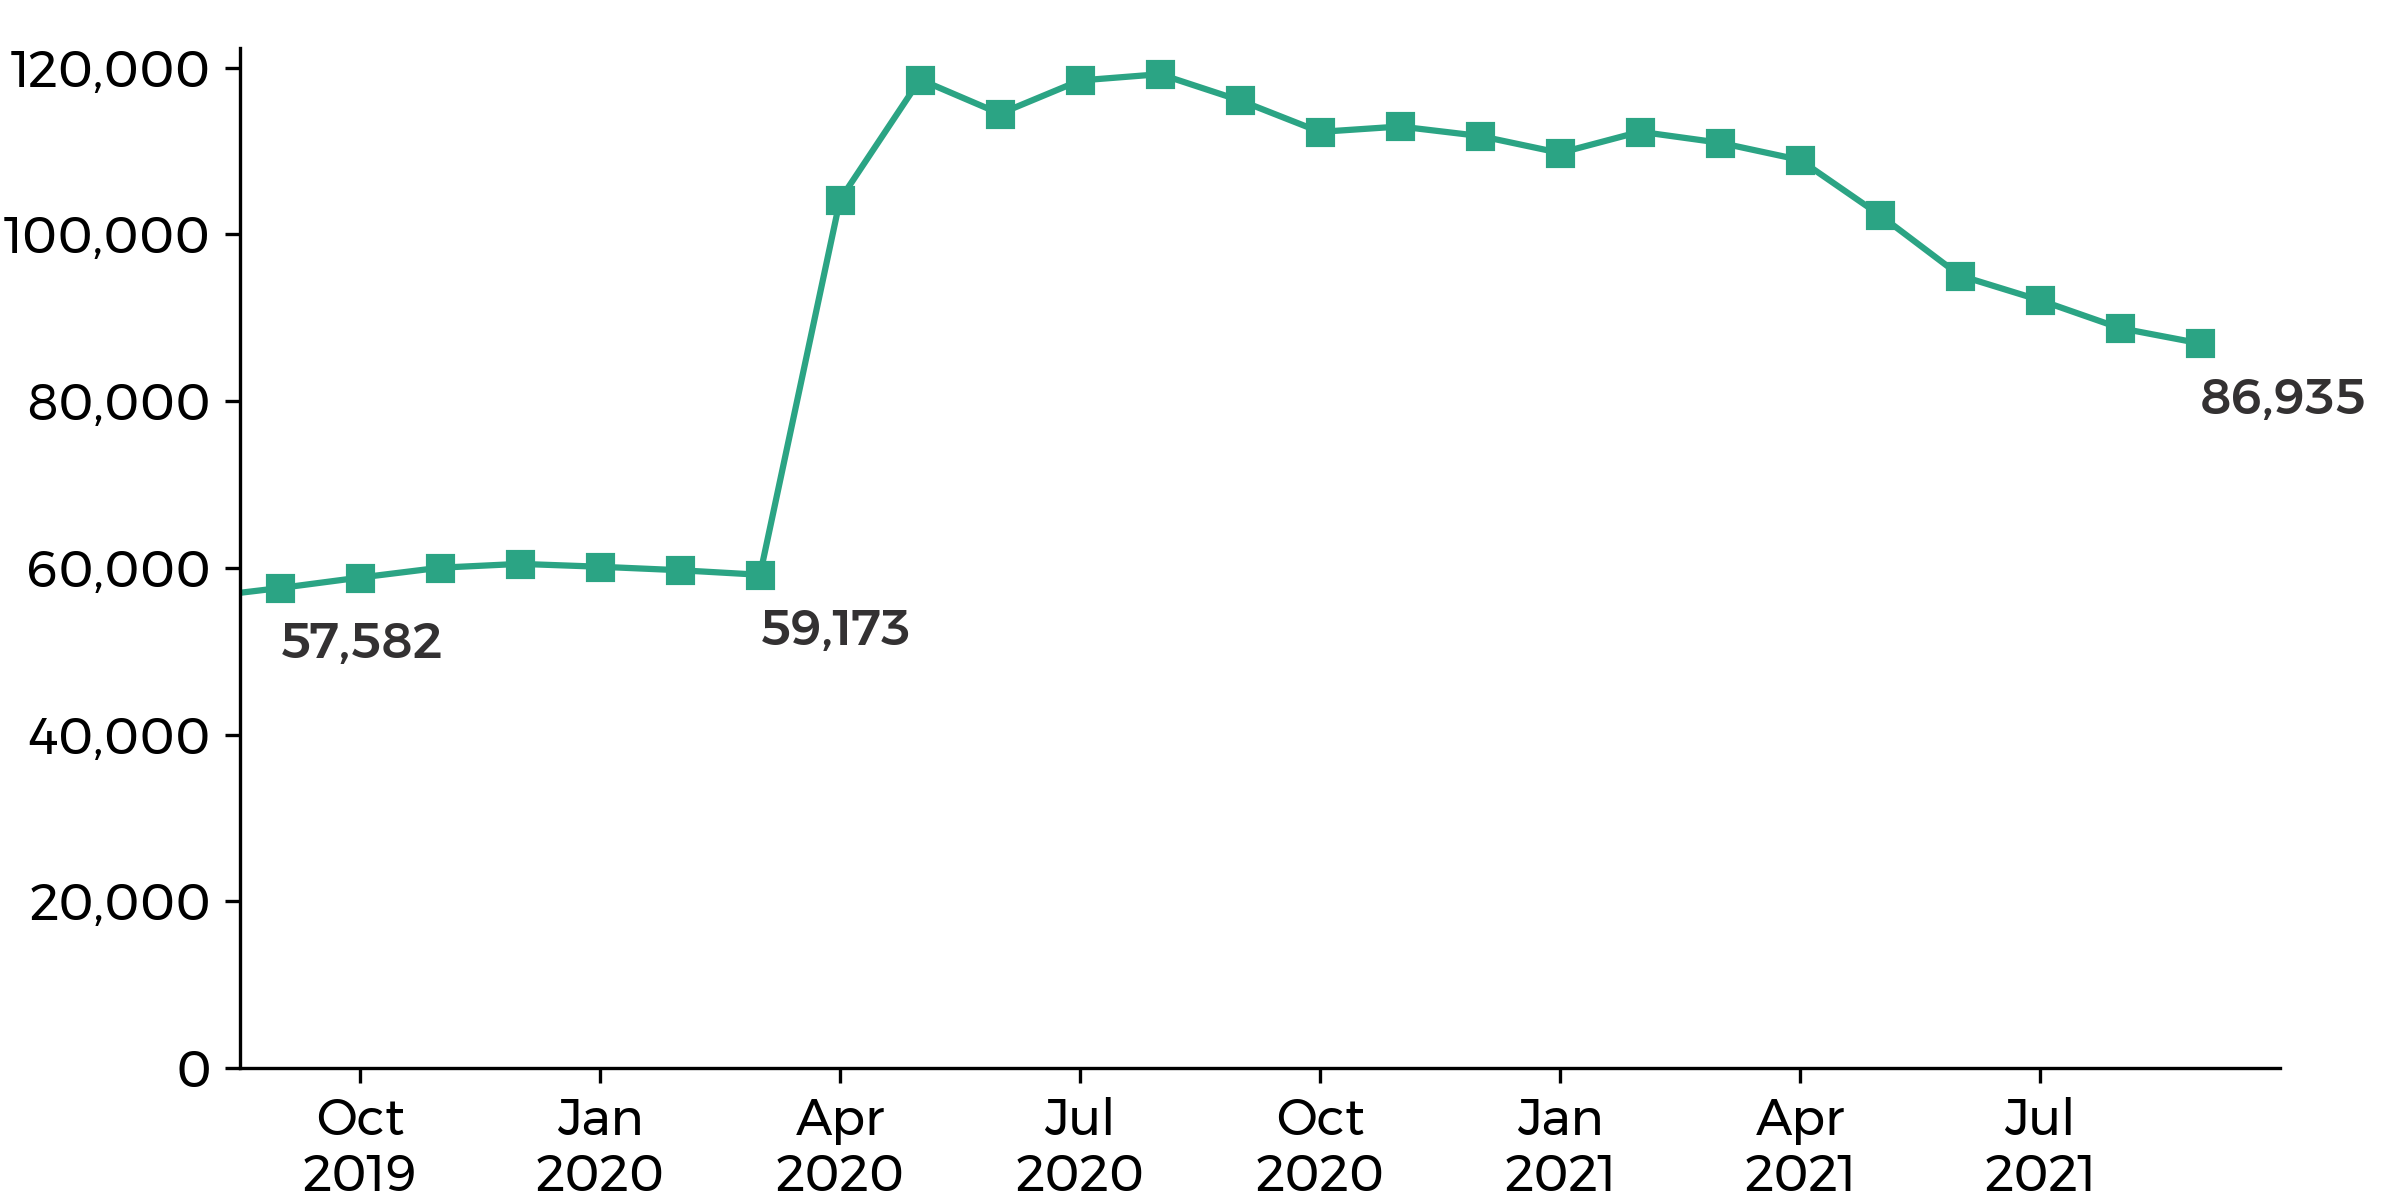 graph showing the Wales claimant count went up from 59,173 in March 2020 to 119,232 in August 2020, then decreasing to 86,935 in September 2021.